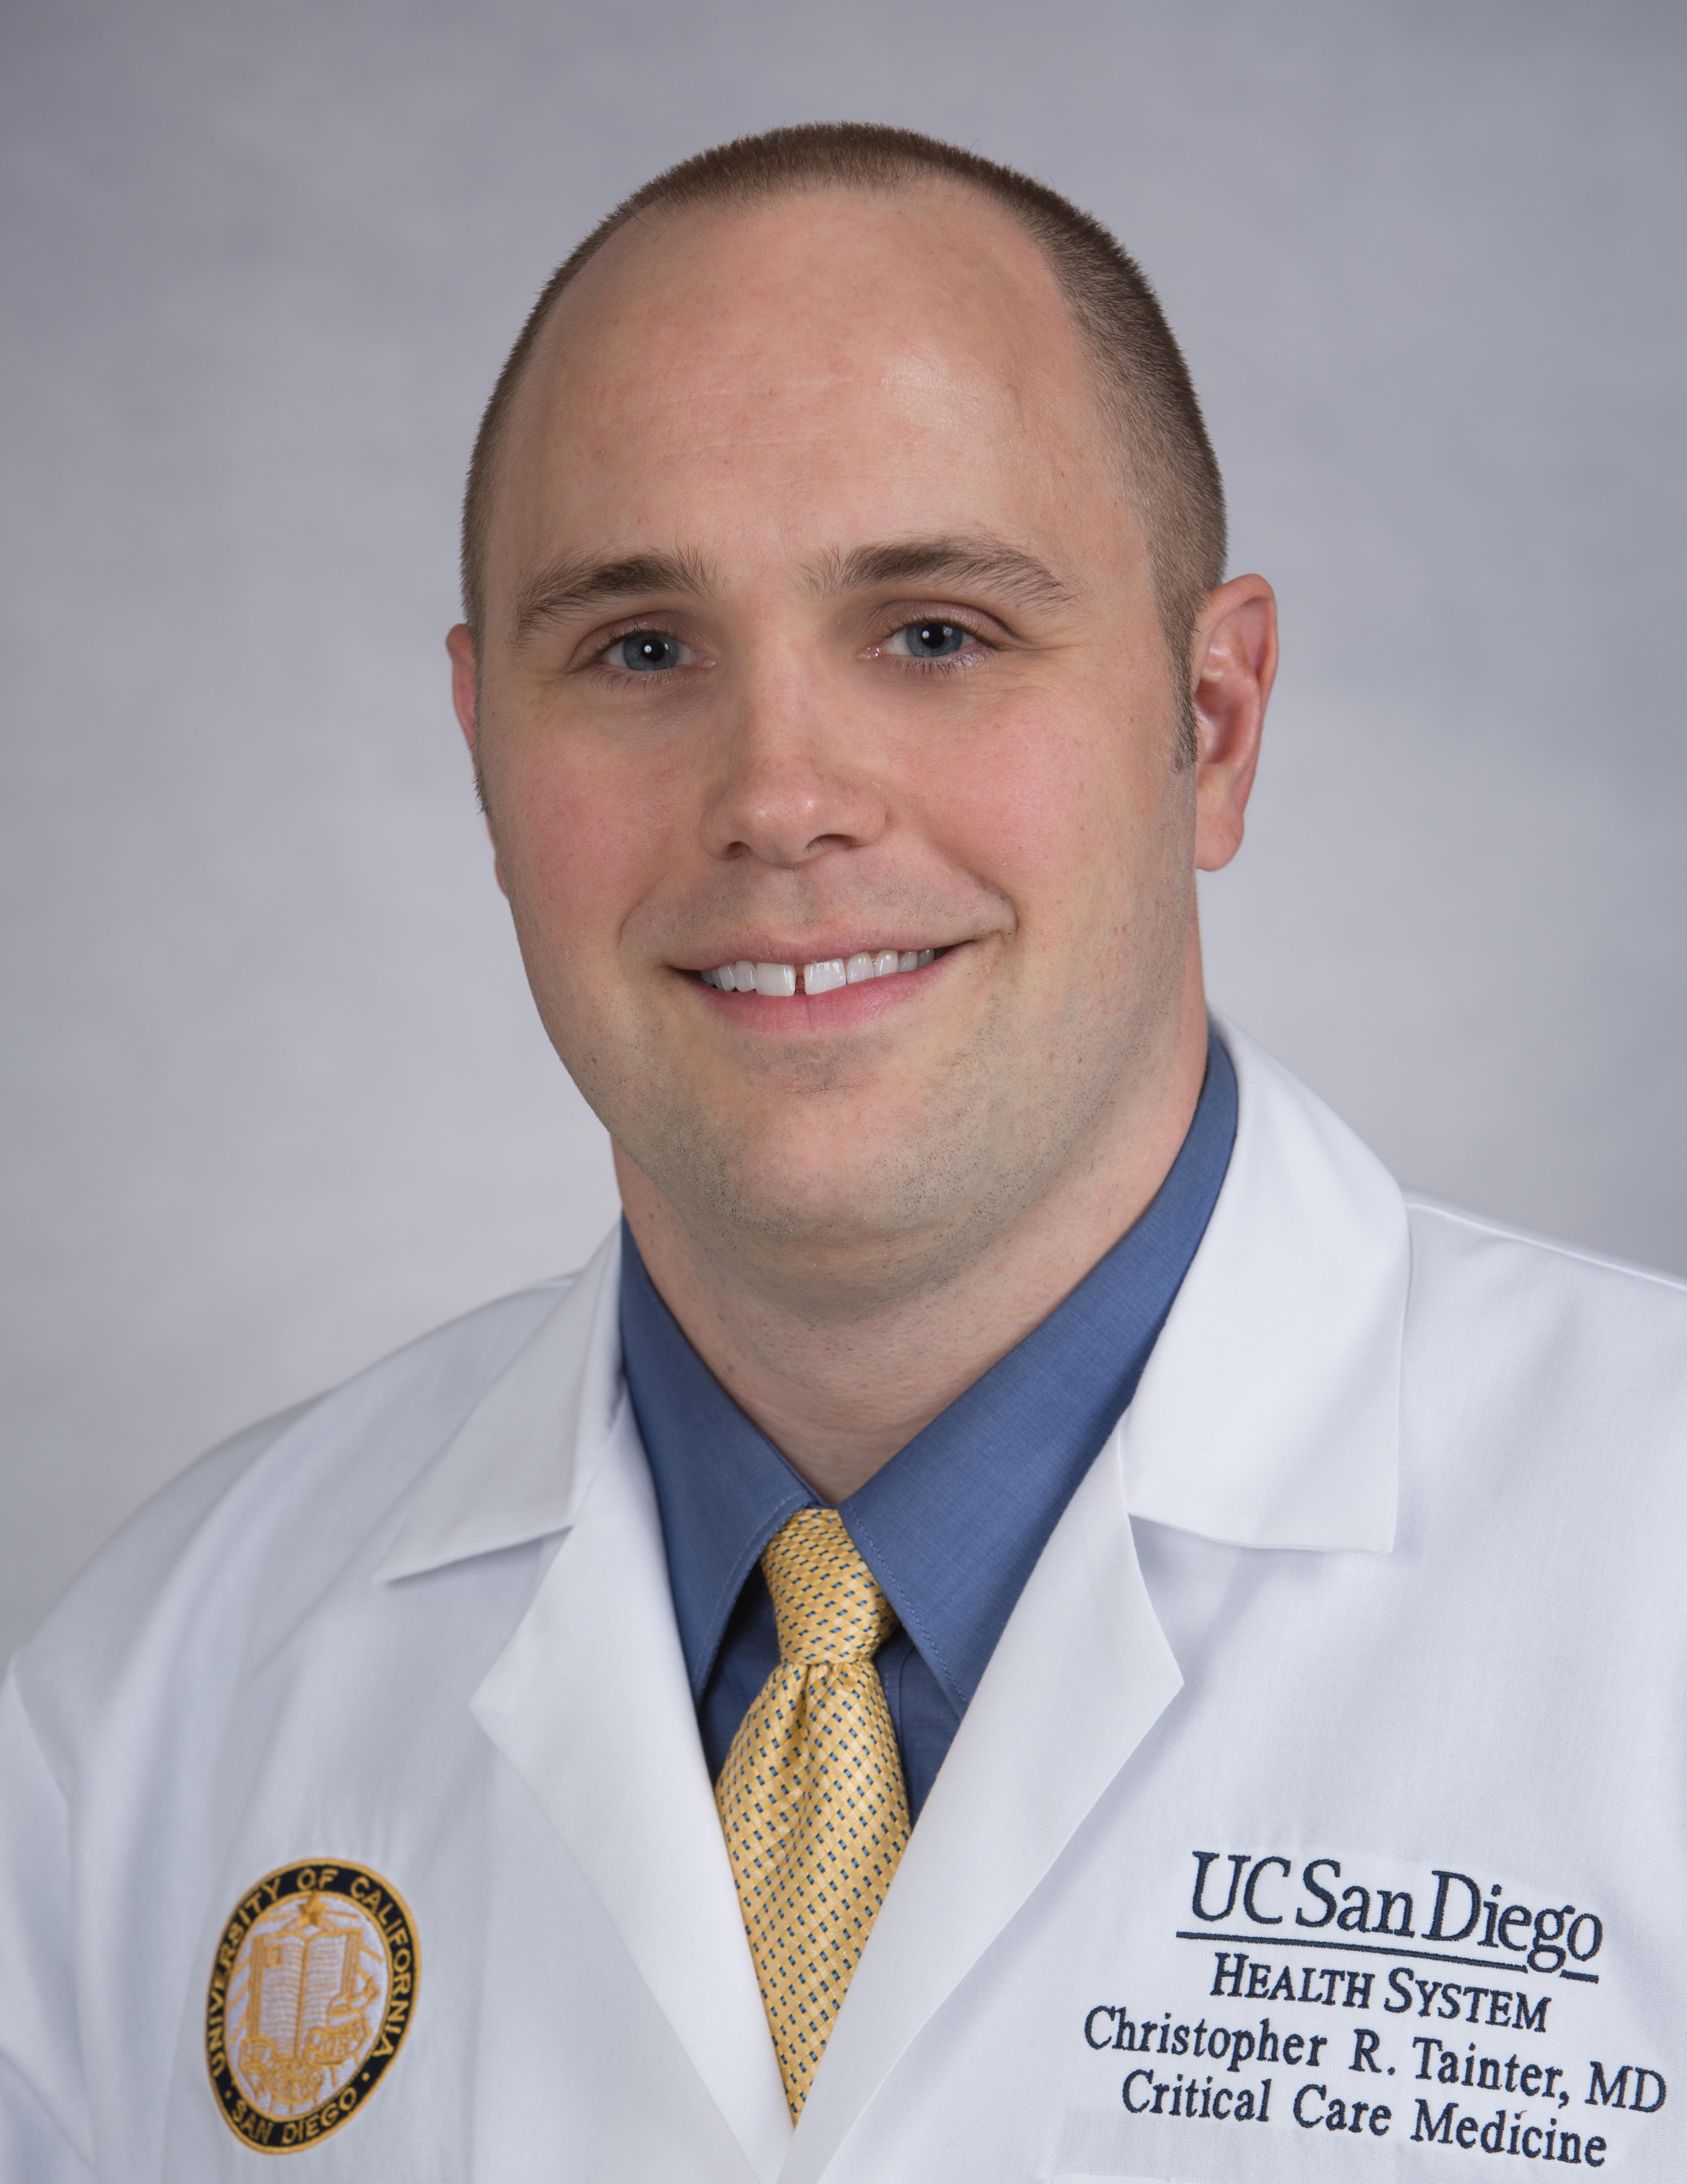 Dr. Christopher R. Tainter